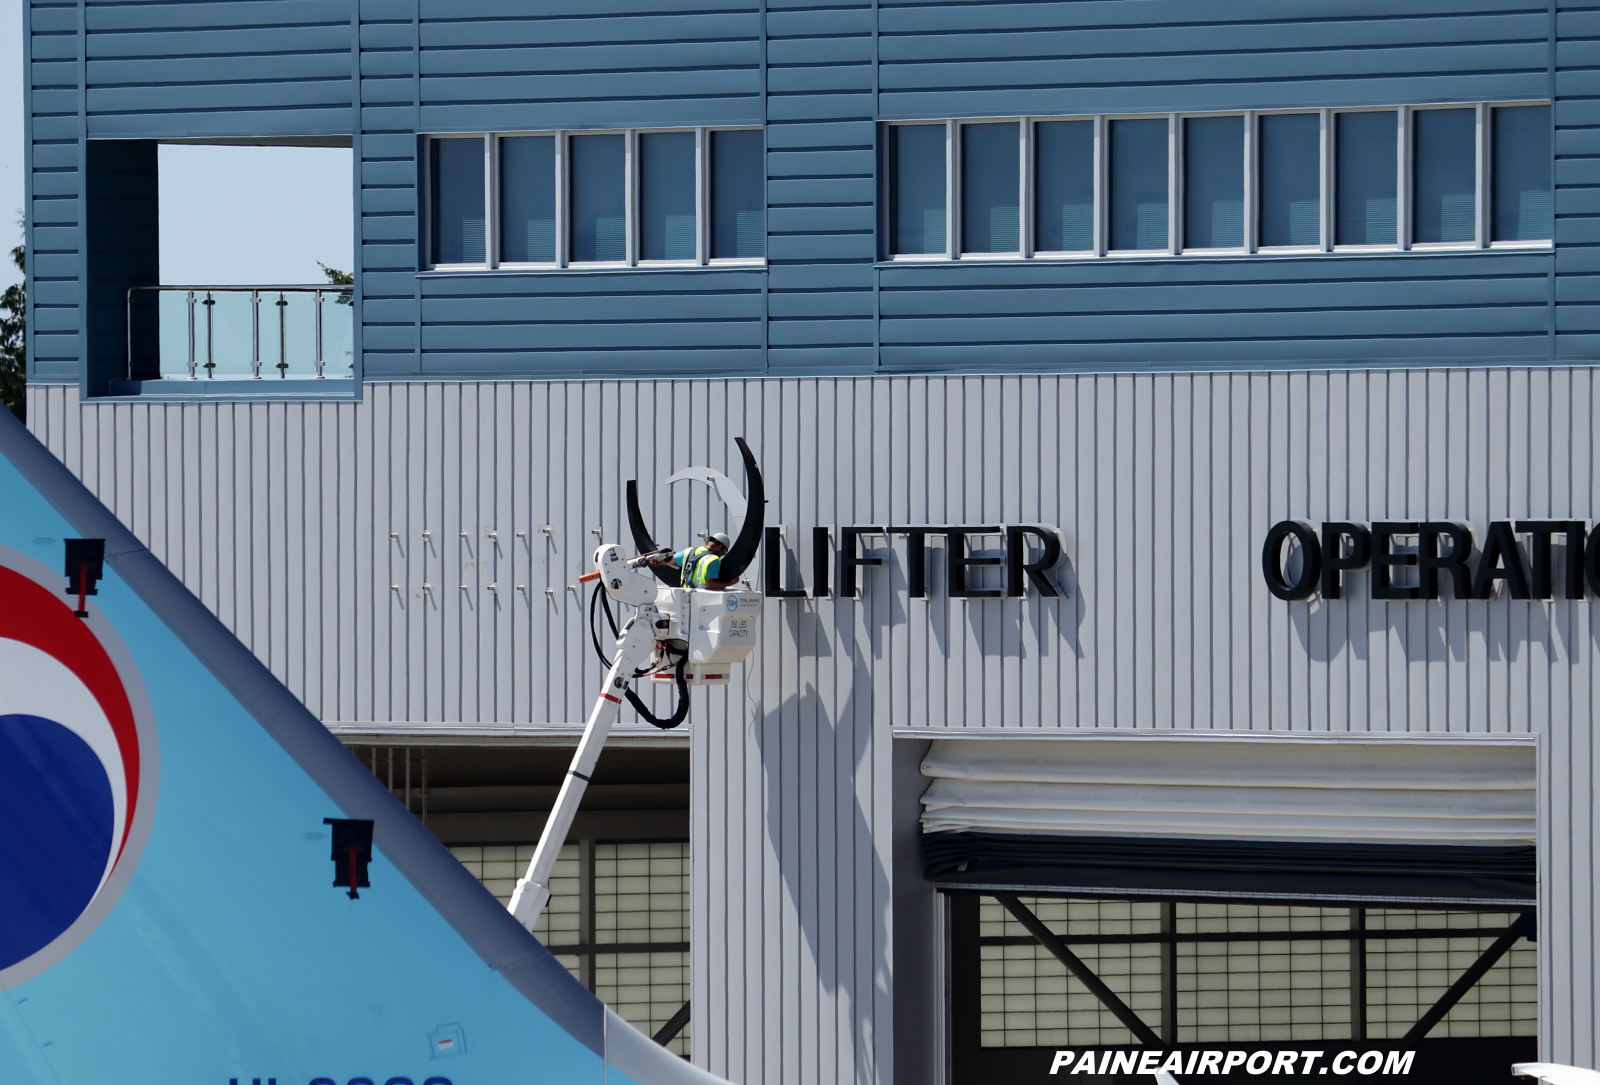 Dreamlifter Operations Center at KPAE Paine Field